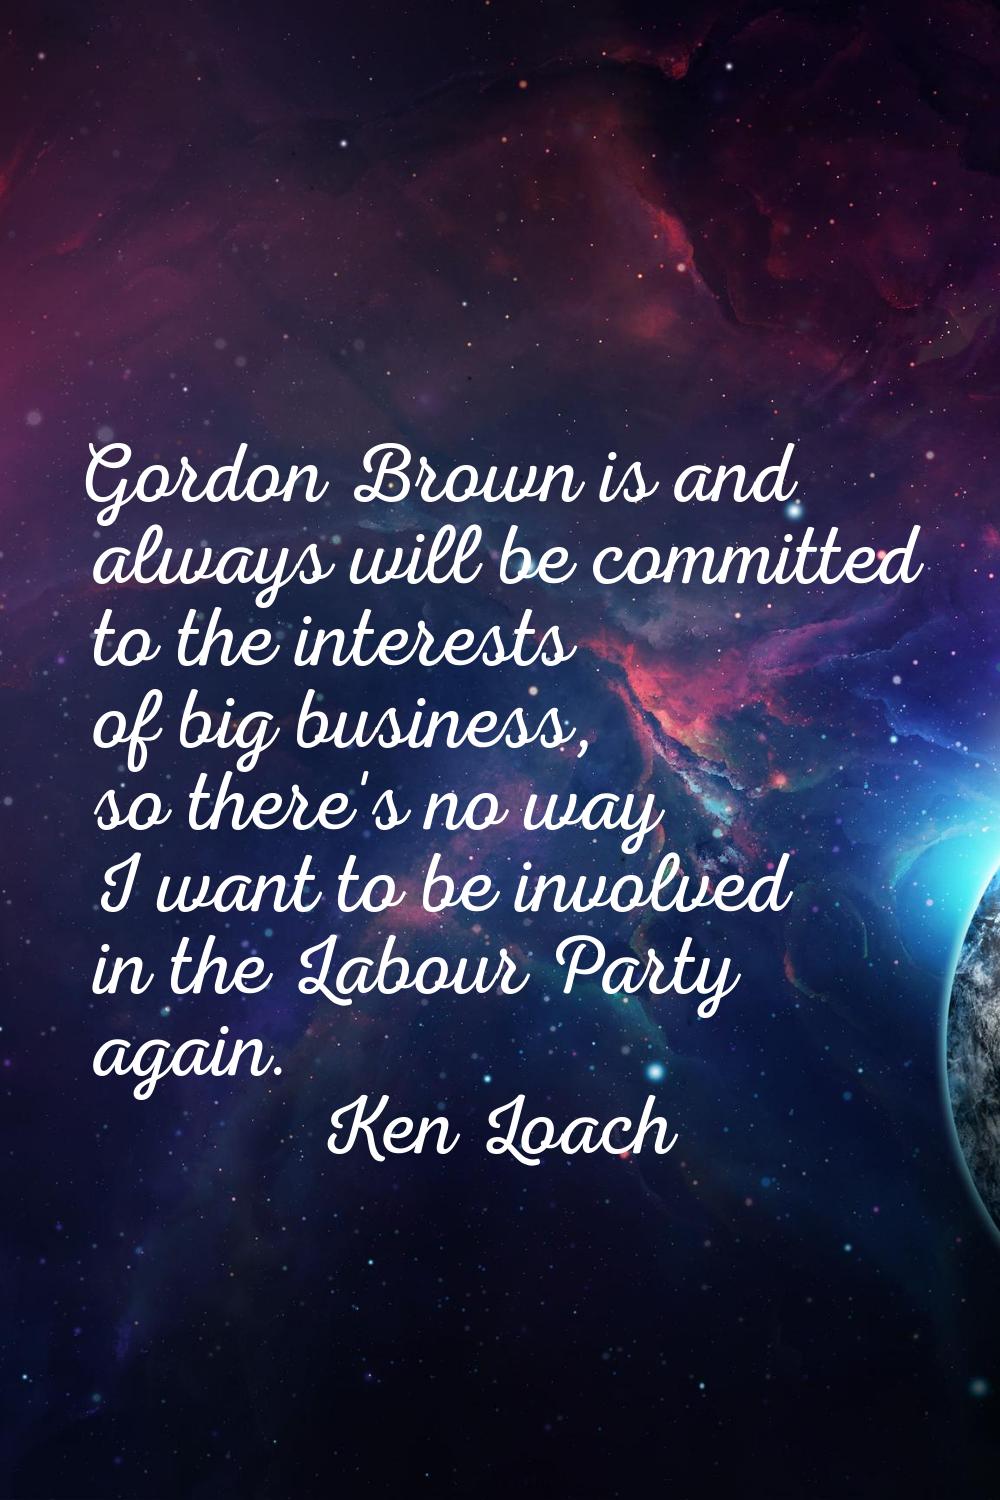 Gordon Brown is and always will be committed to the interests of big business, so there's no way I 